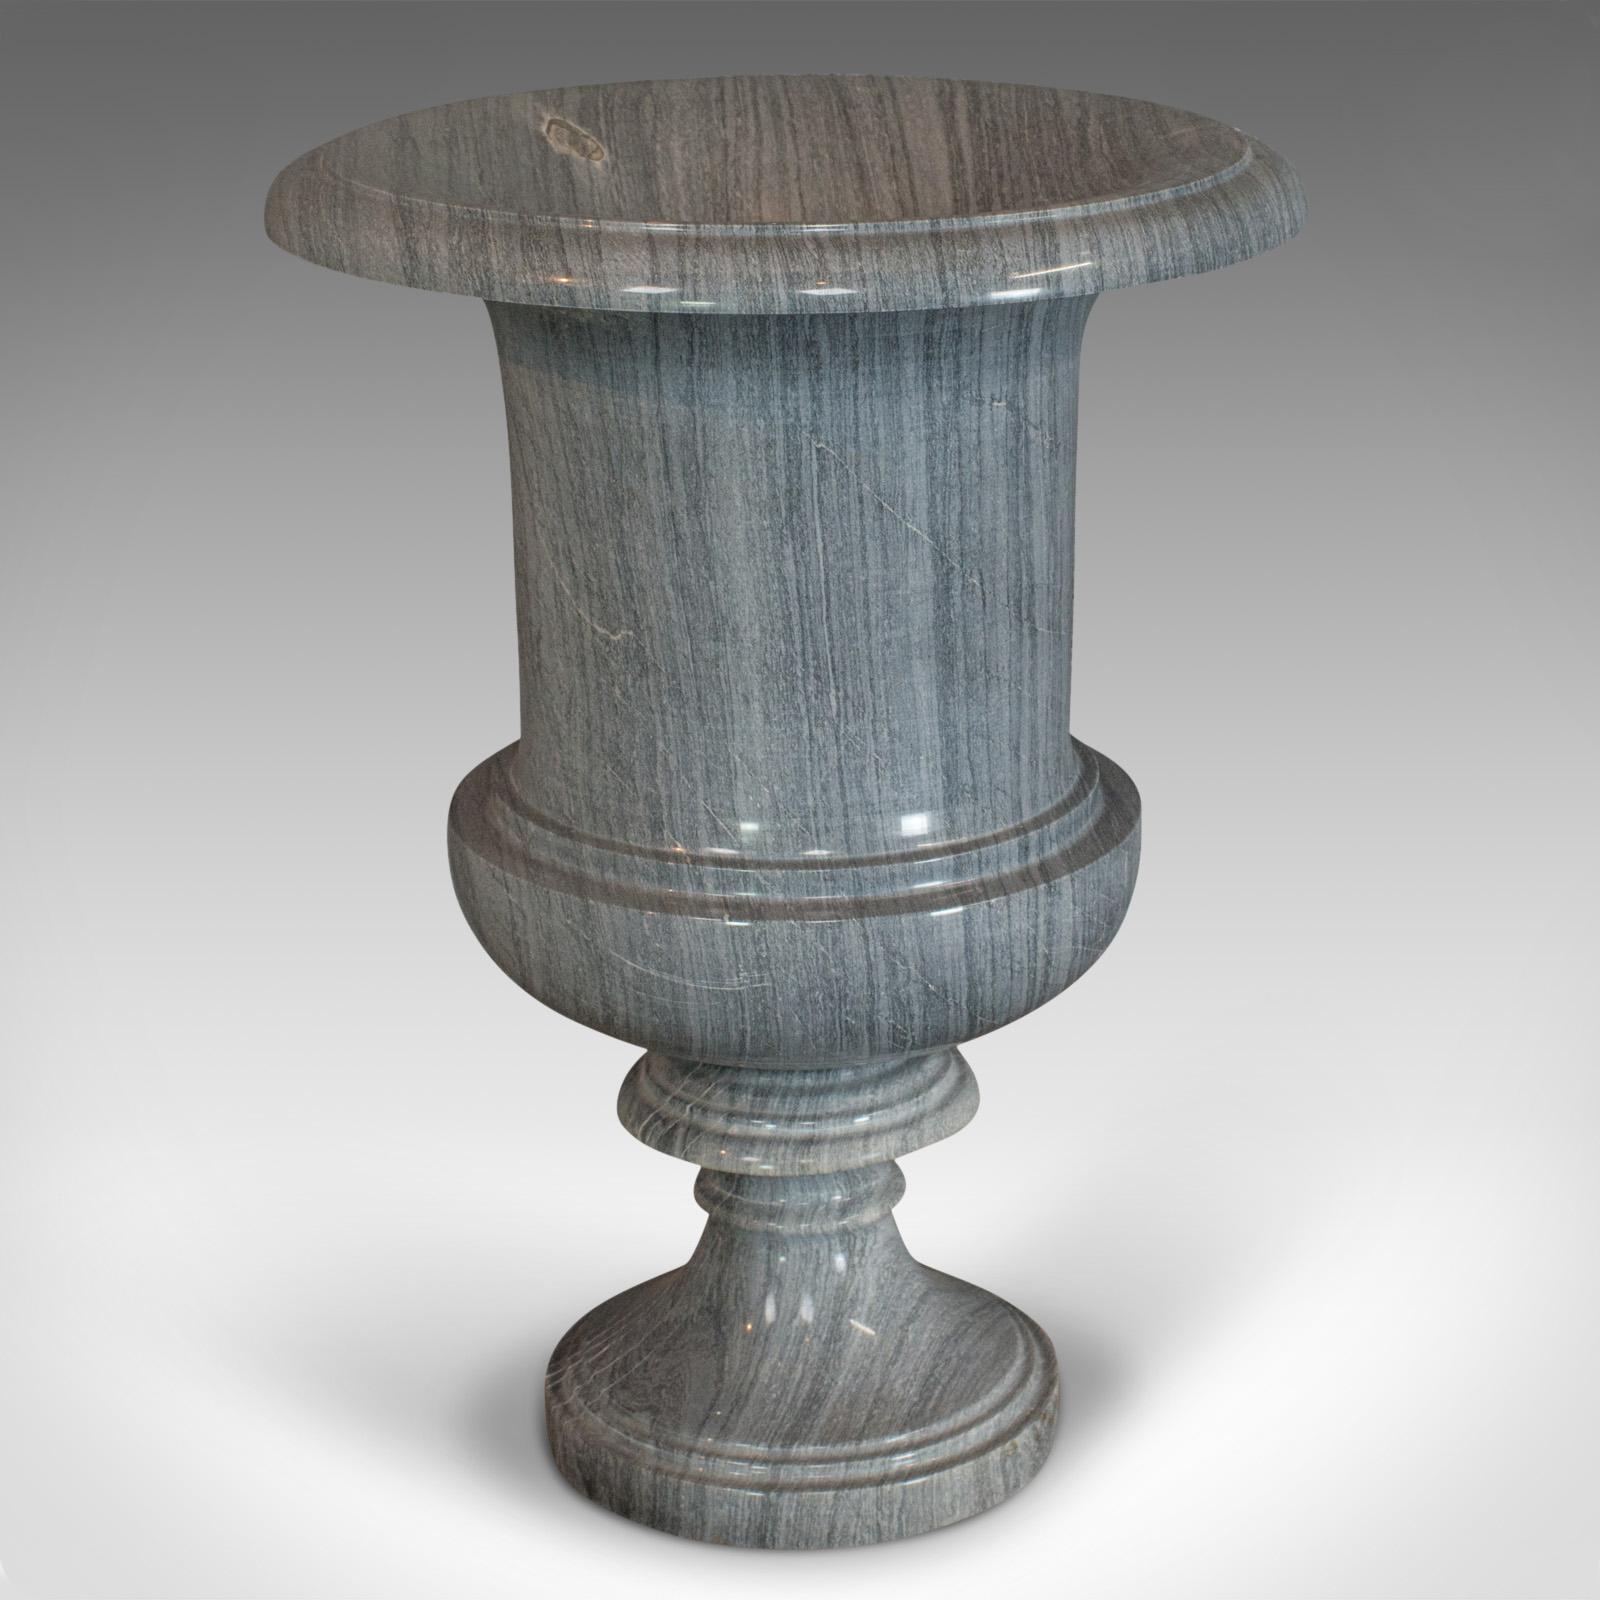 This is a vintage decorative vase. An English, platinum striata marble baluster urn, dating to the late 20th century.

Stunning marble vase, to enhance any space
Displays a desirable aged patina
Classic baluster urn form with an abundance of